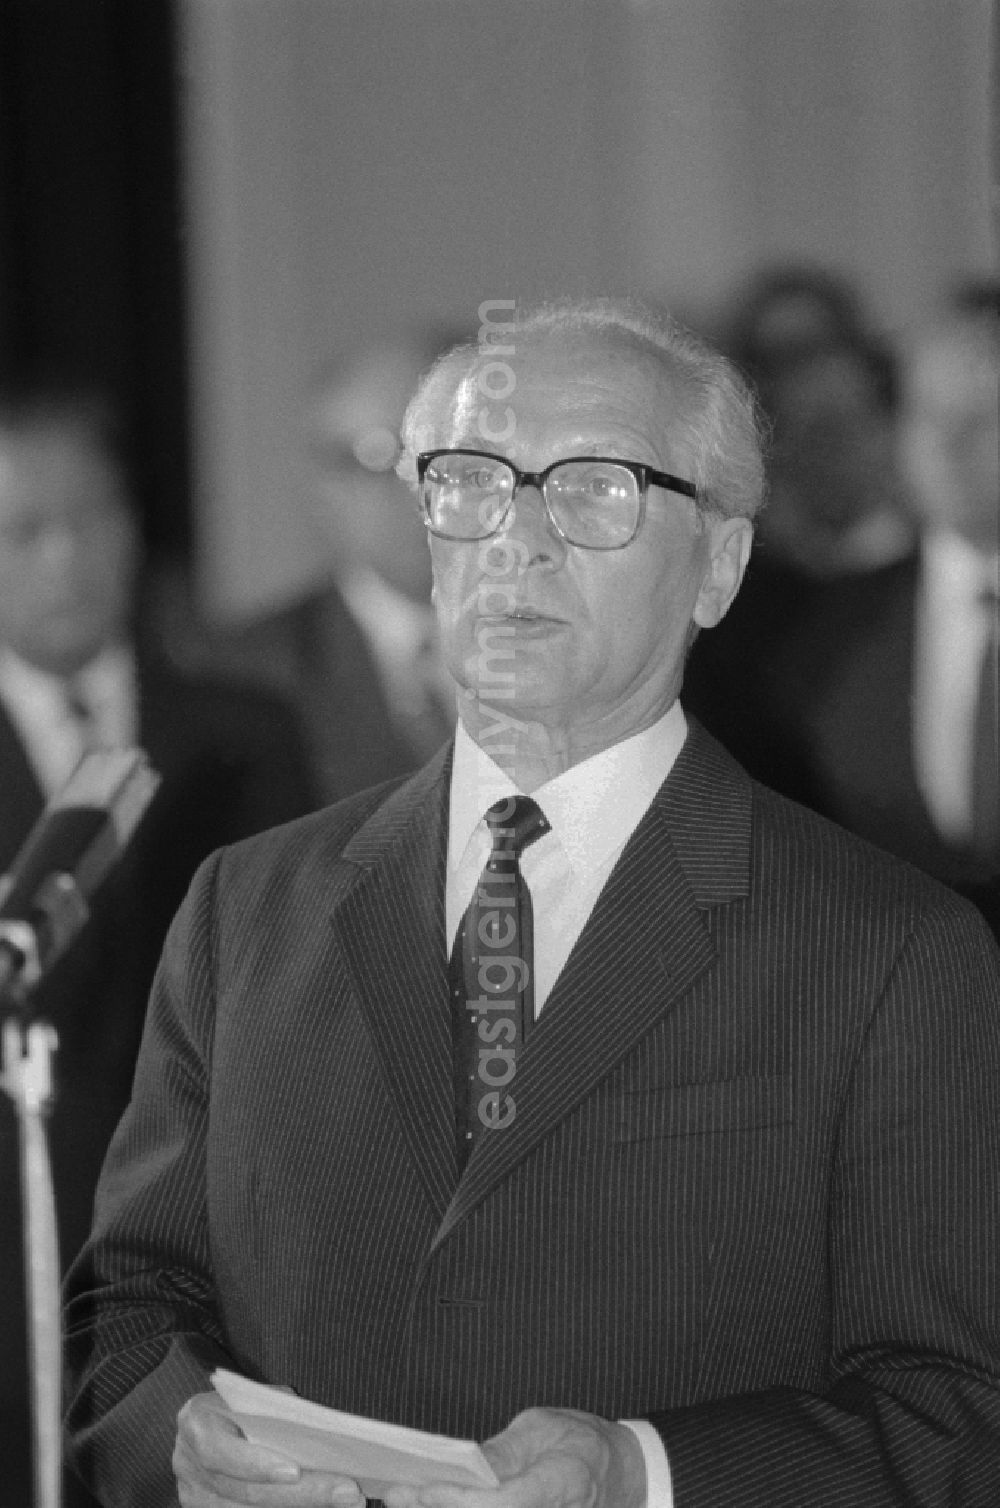 Prag: Erich Honecker (1912 - 1994), general secretary of the Central Committee of the SED Central Committee Socialist Unity Party and Chairman of the State Council official visit during a state visit in Prague in Czechoslovakia / Czech Republic